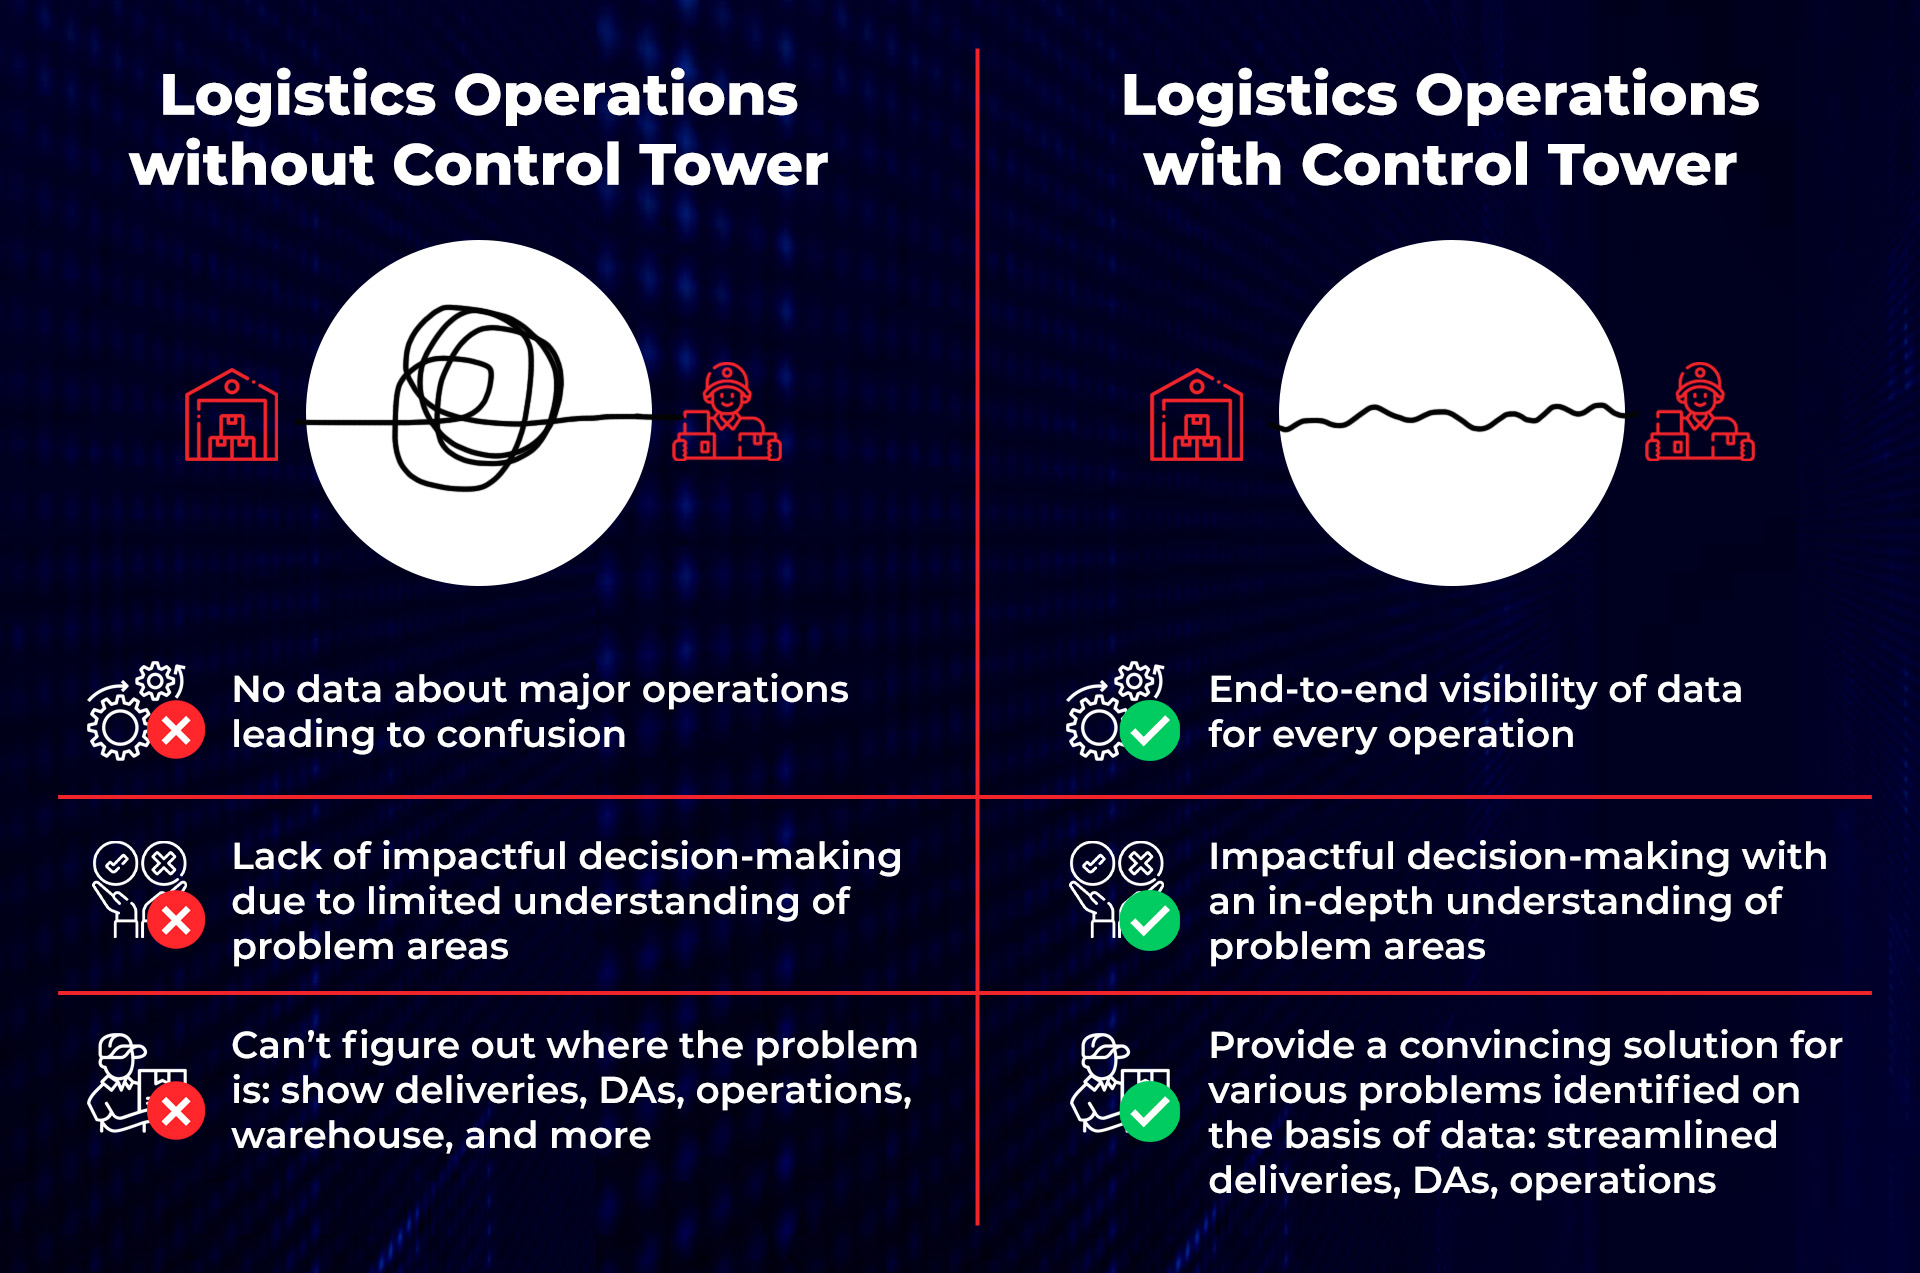 Infographic on how control tower helps improve logistics operations